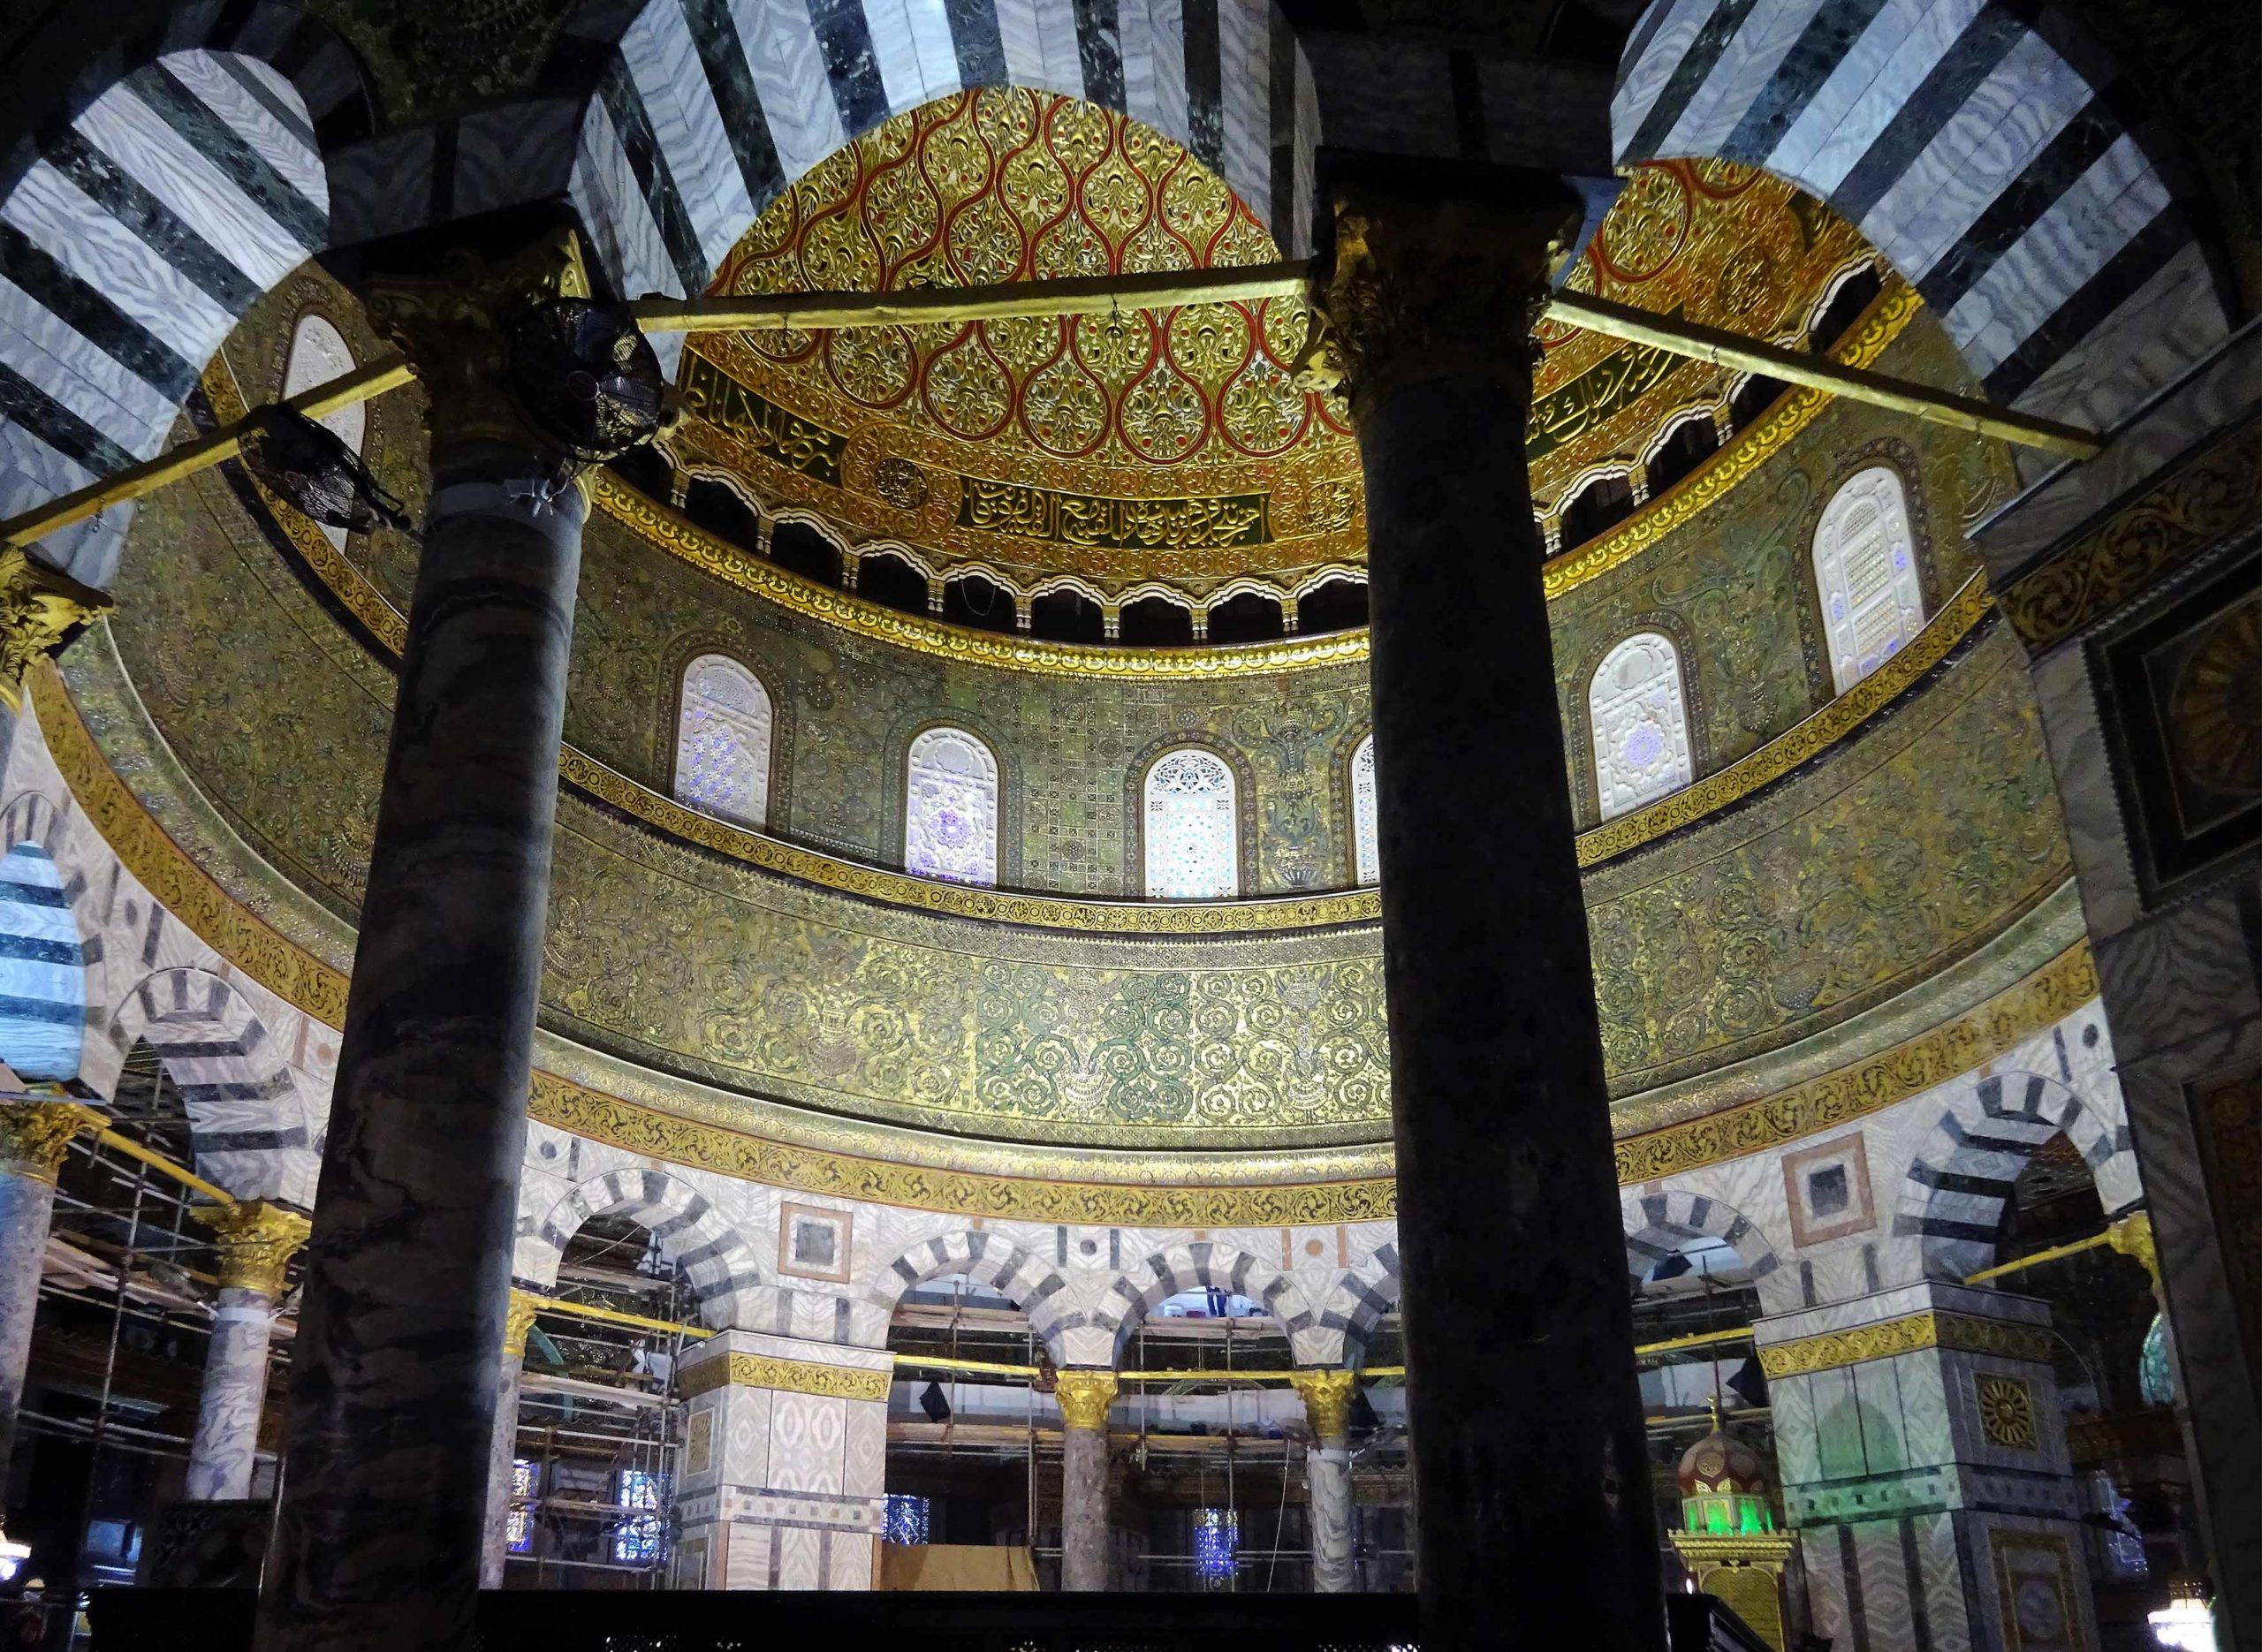 Interior view of the Dome of the Rock